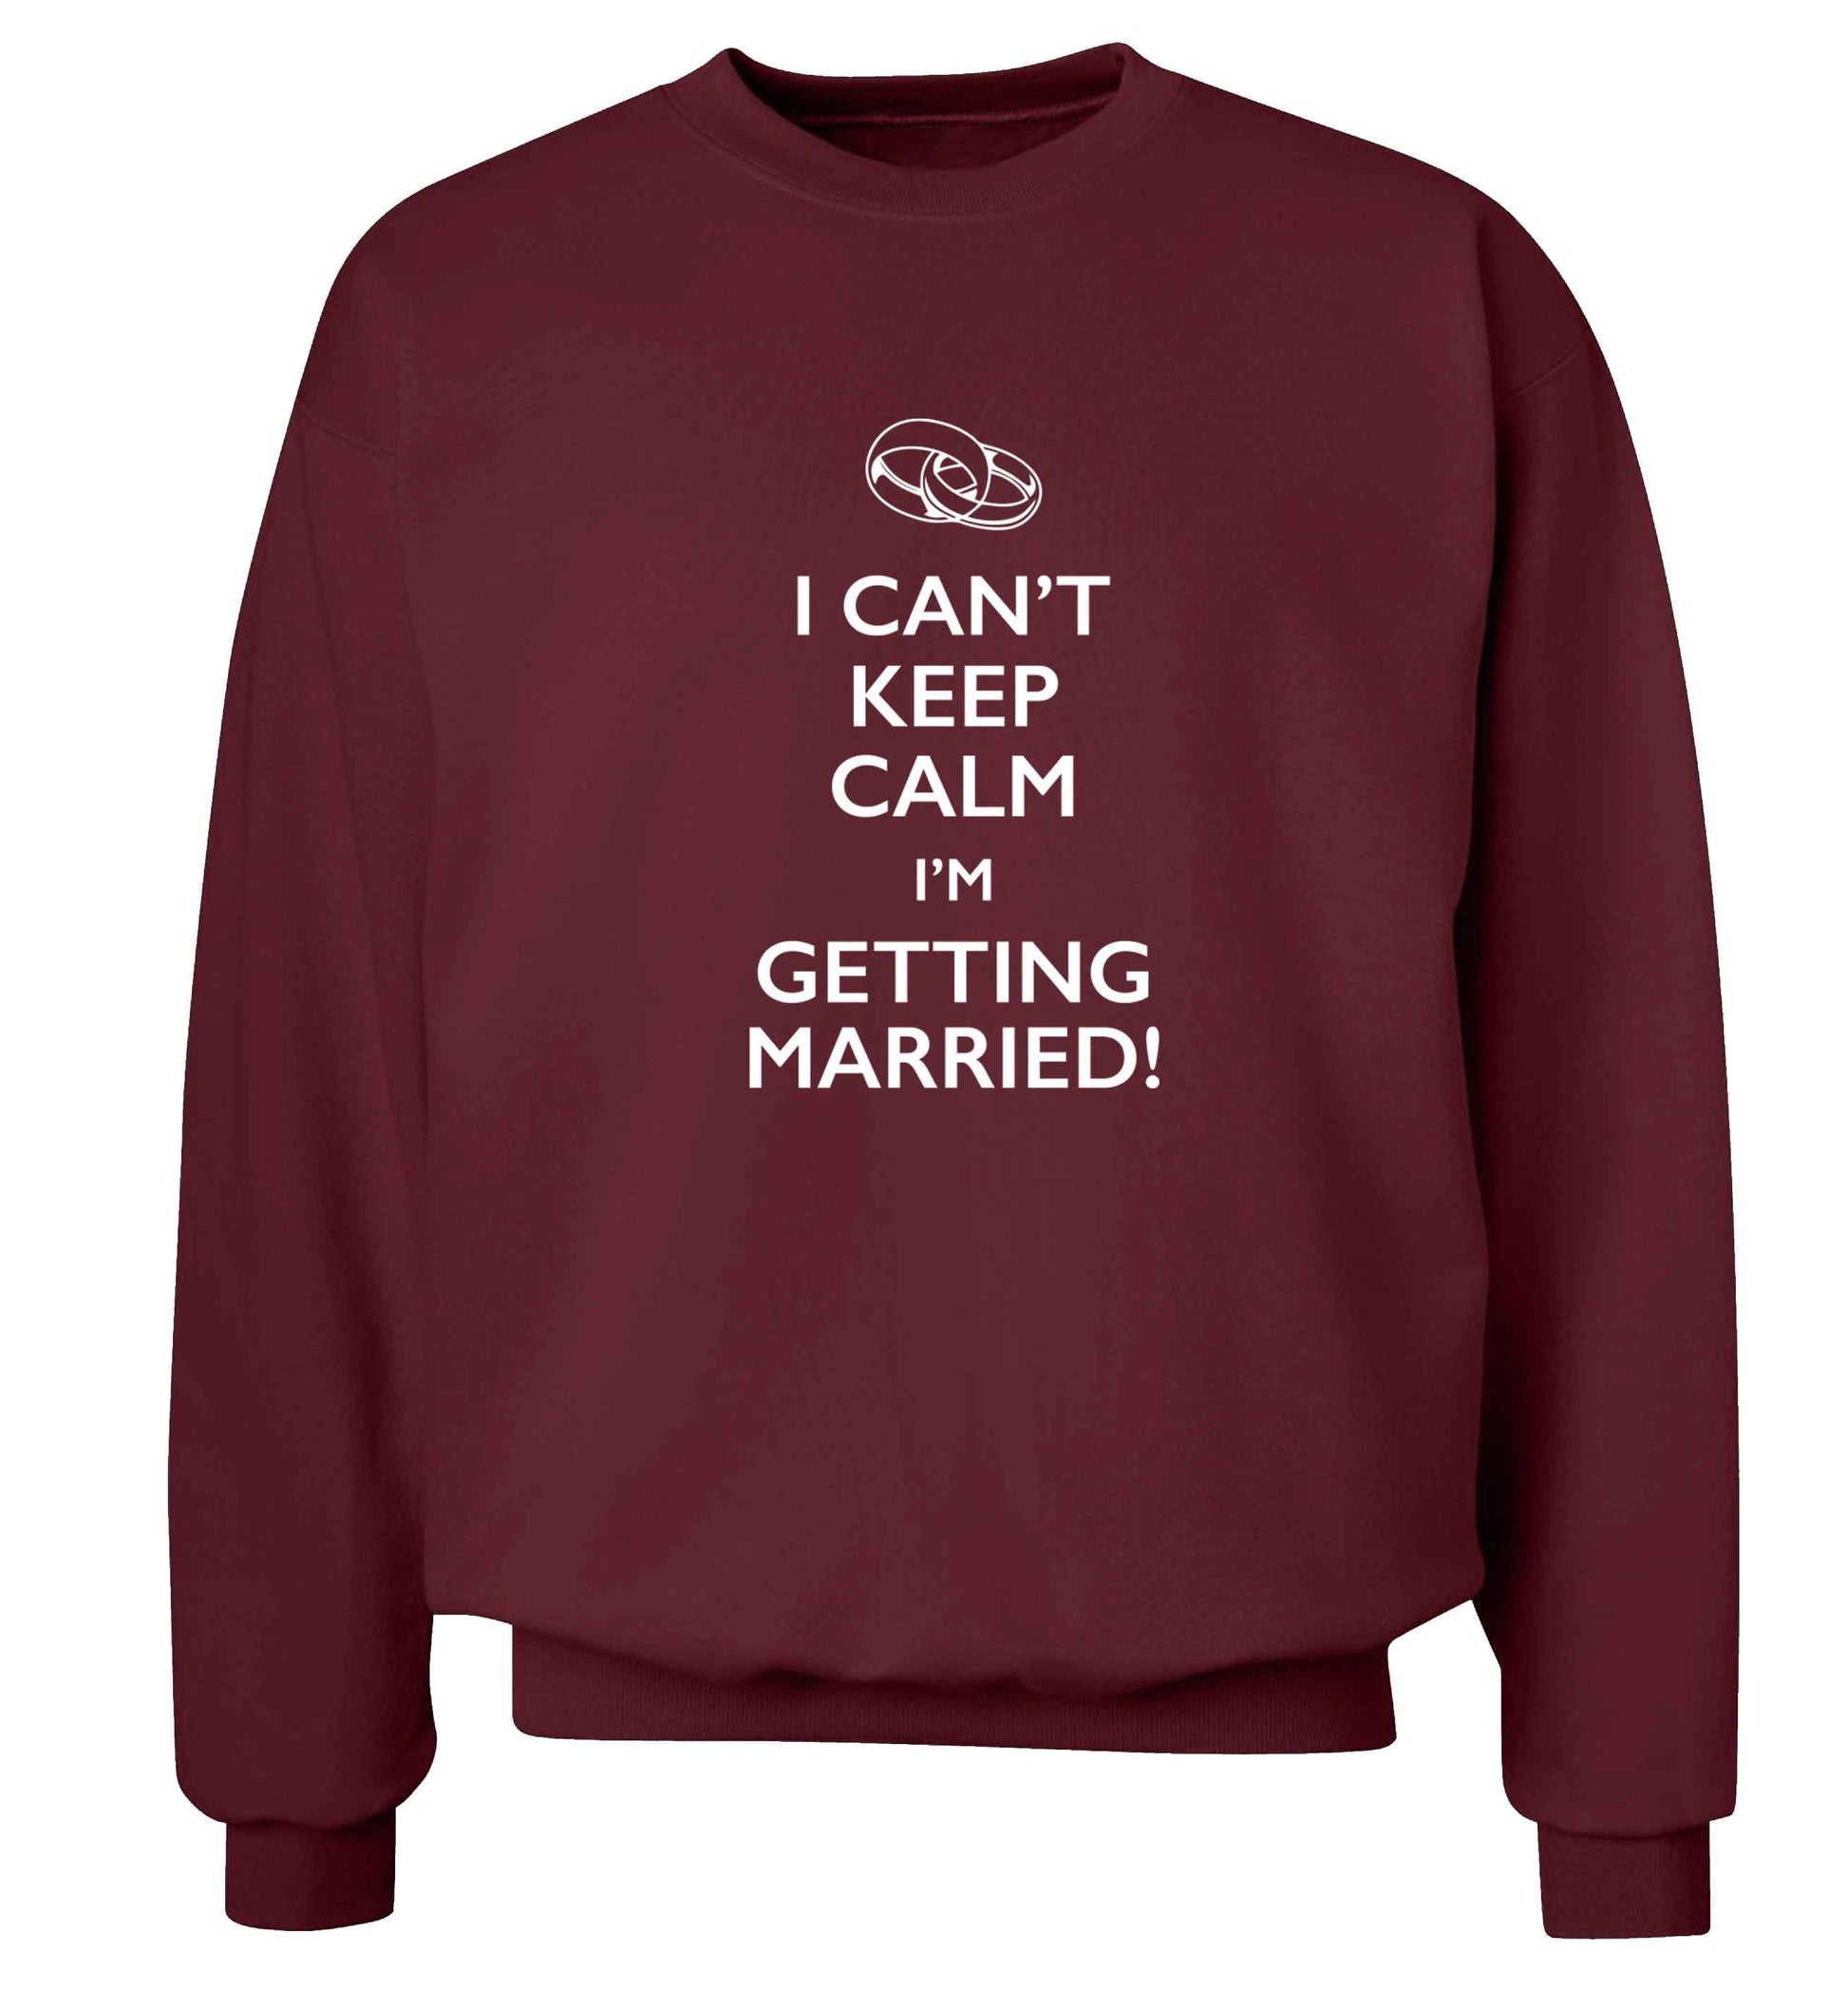 I can't keep calm I'm getting married! adult's unisex maroon sweater 2XL